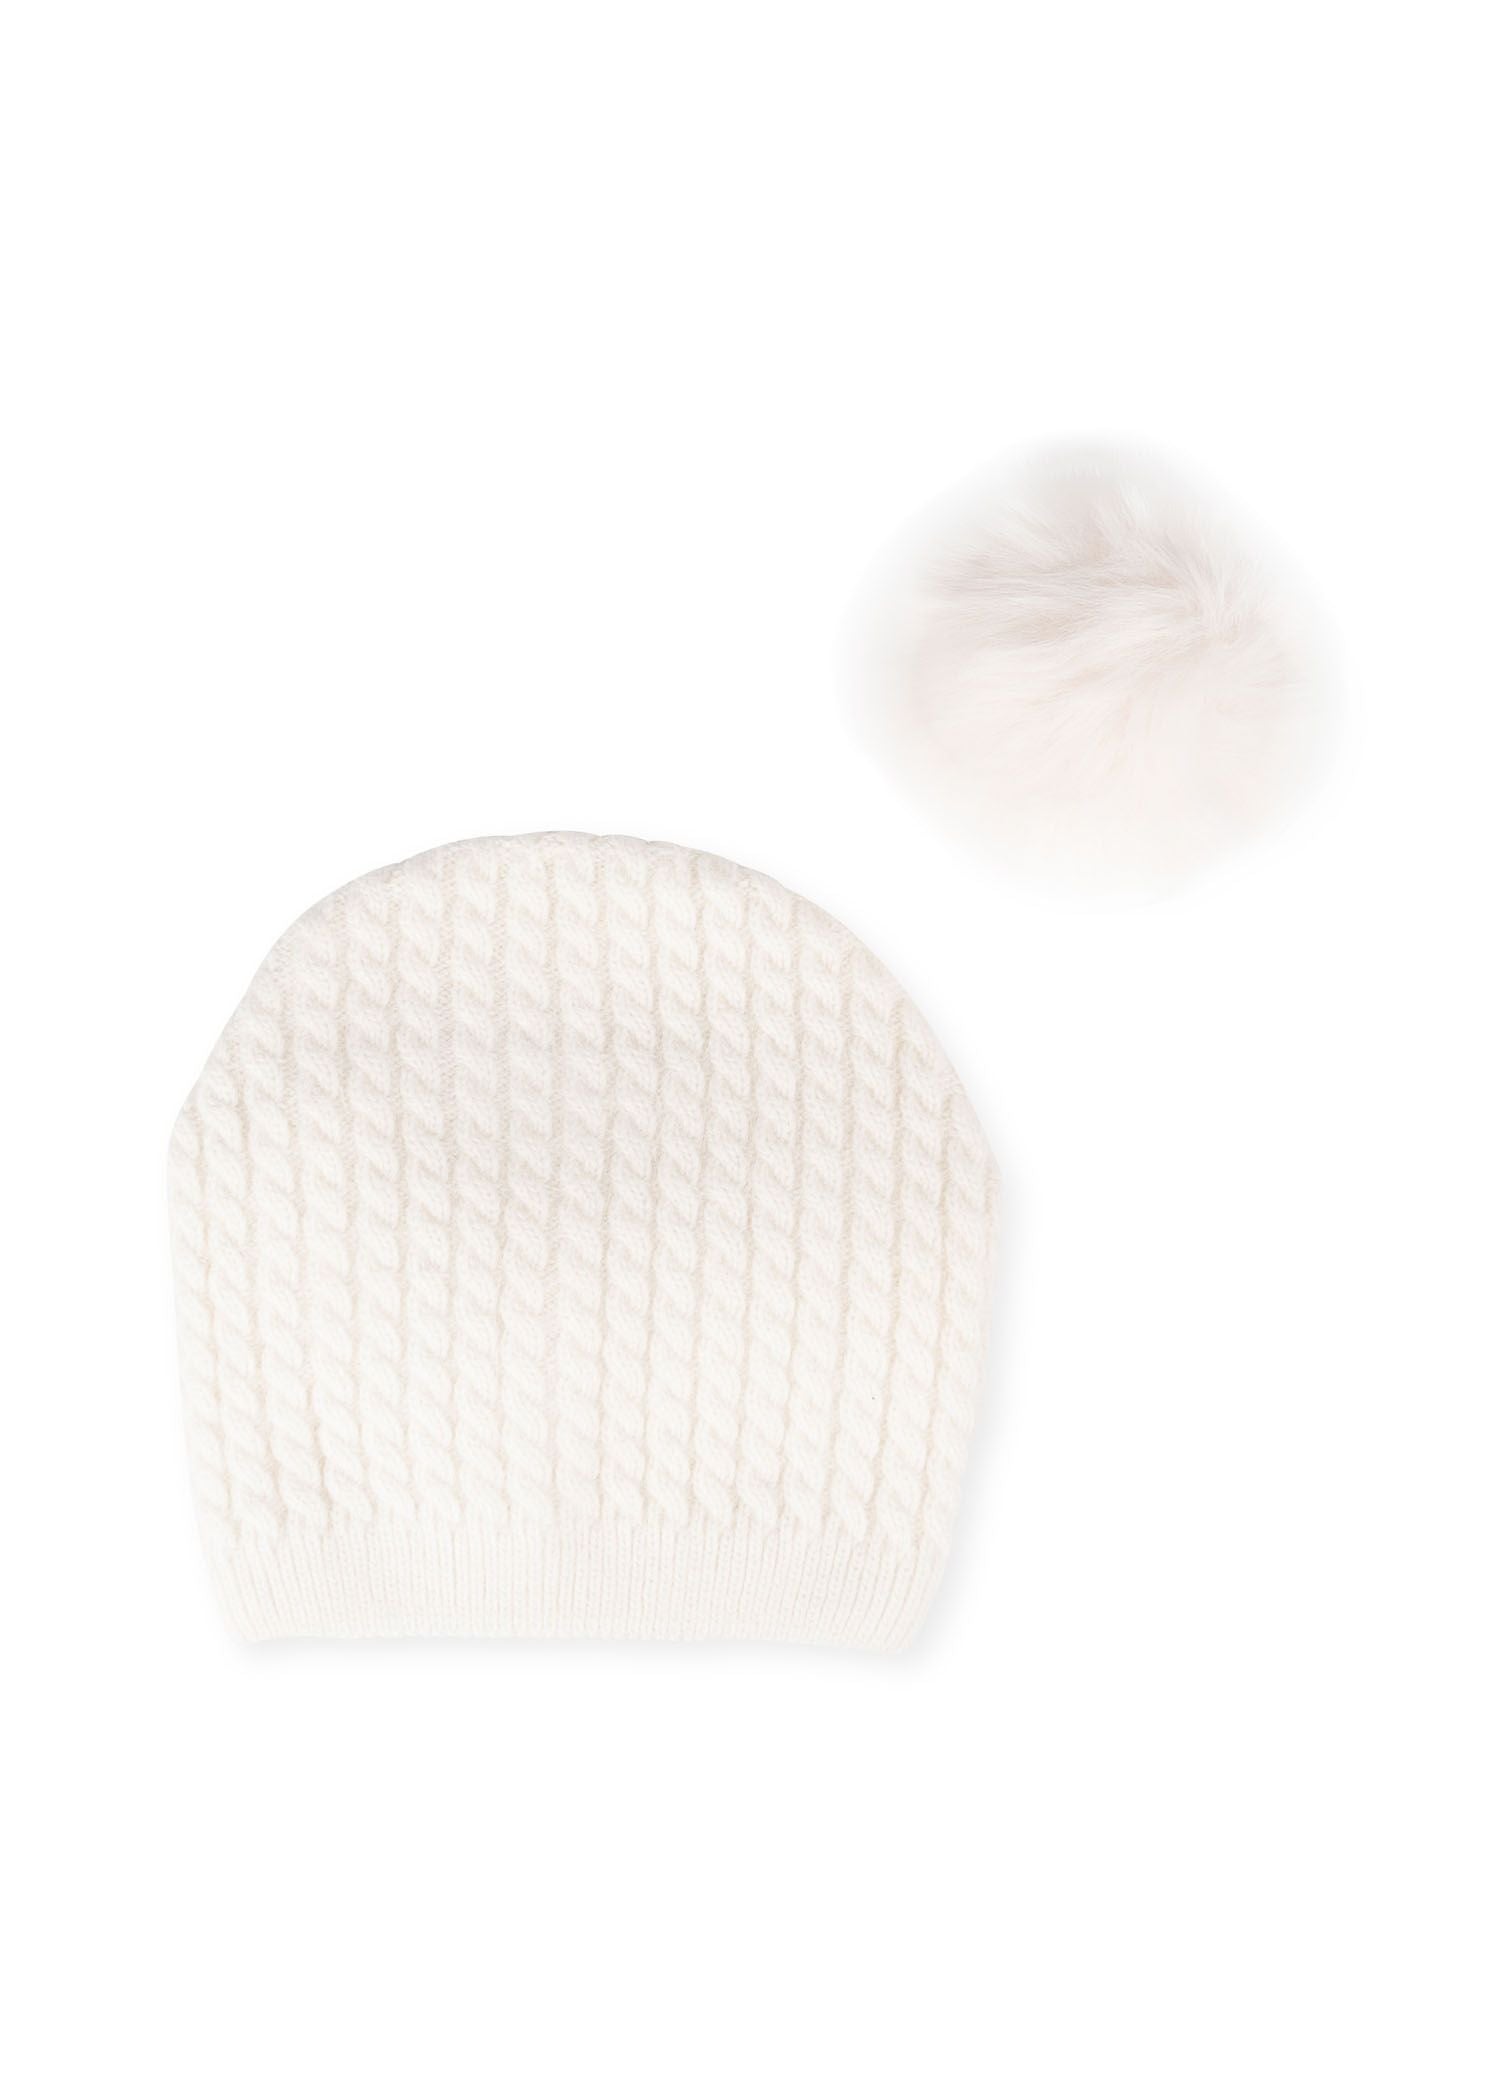 cabin cable hat white